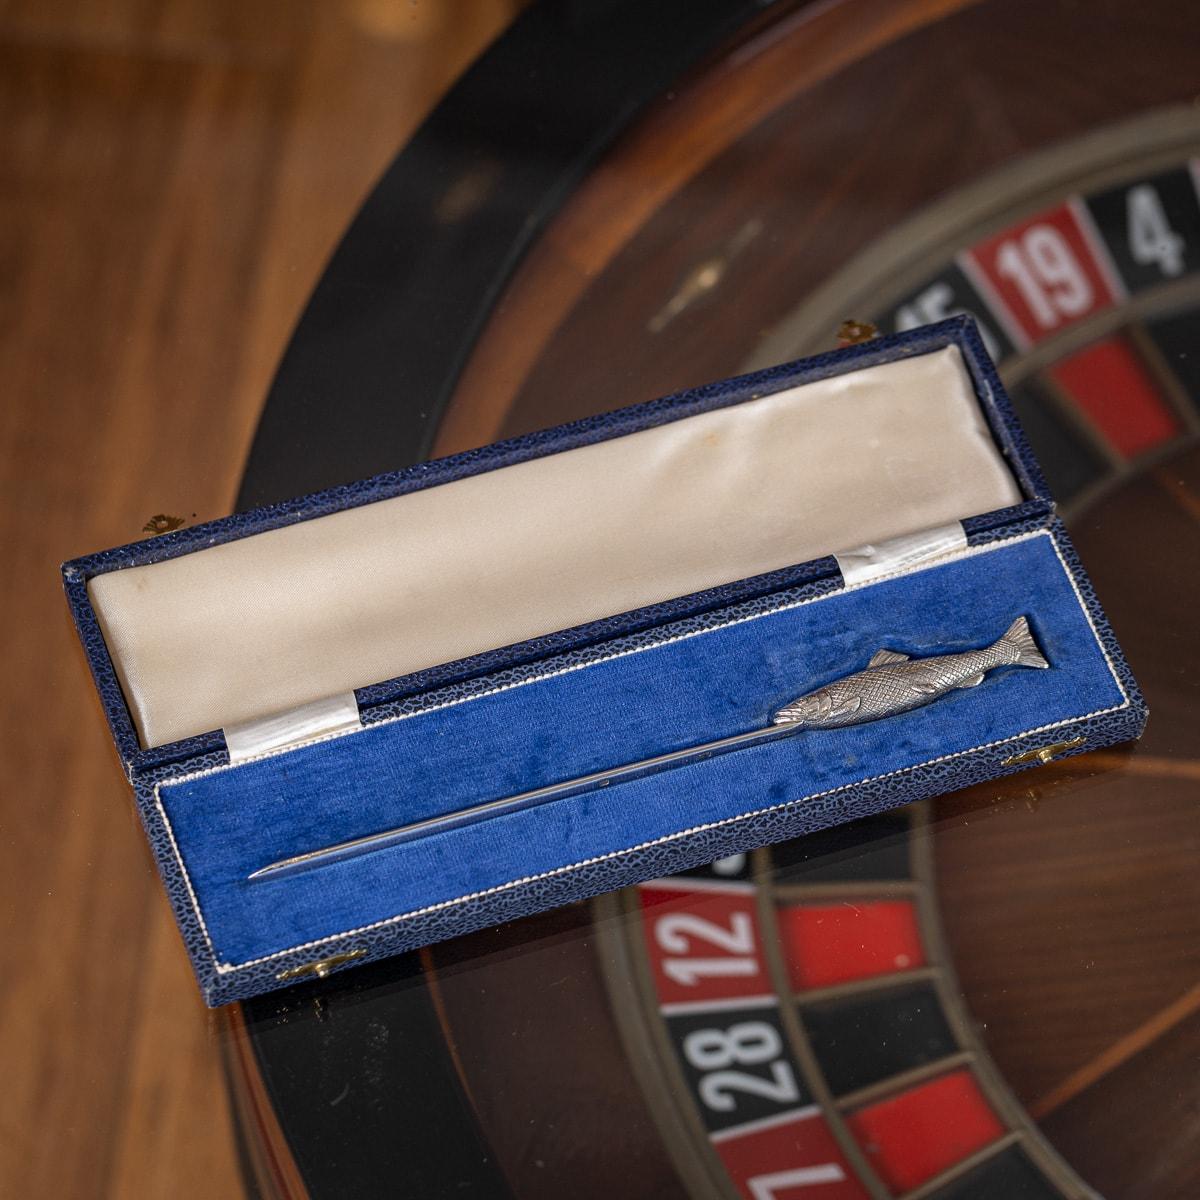 A superb 20th Century vintage novelty letter opener, in the form of a trout fish. This letter opener is of a heavy weight, and is expertly crafted into a life like trout. A long knife like blade allows envelopes and parcels of all sizes to be opened